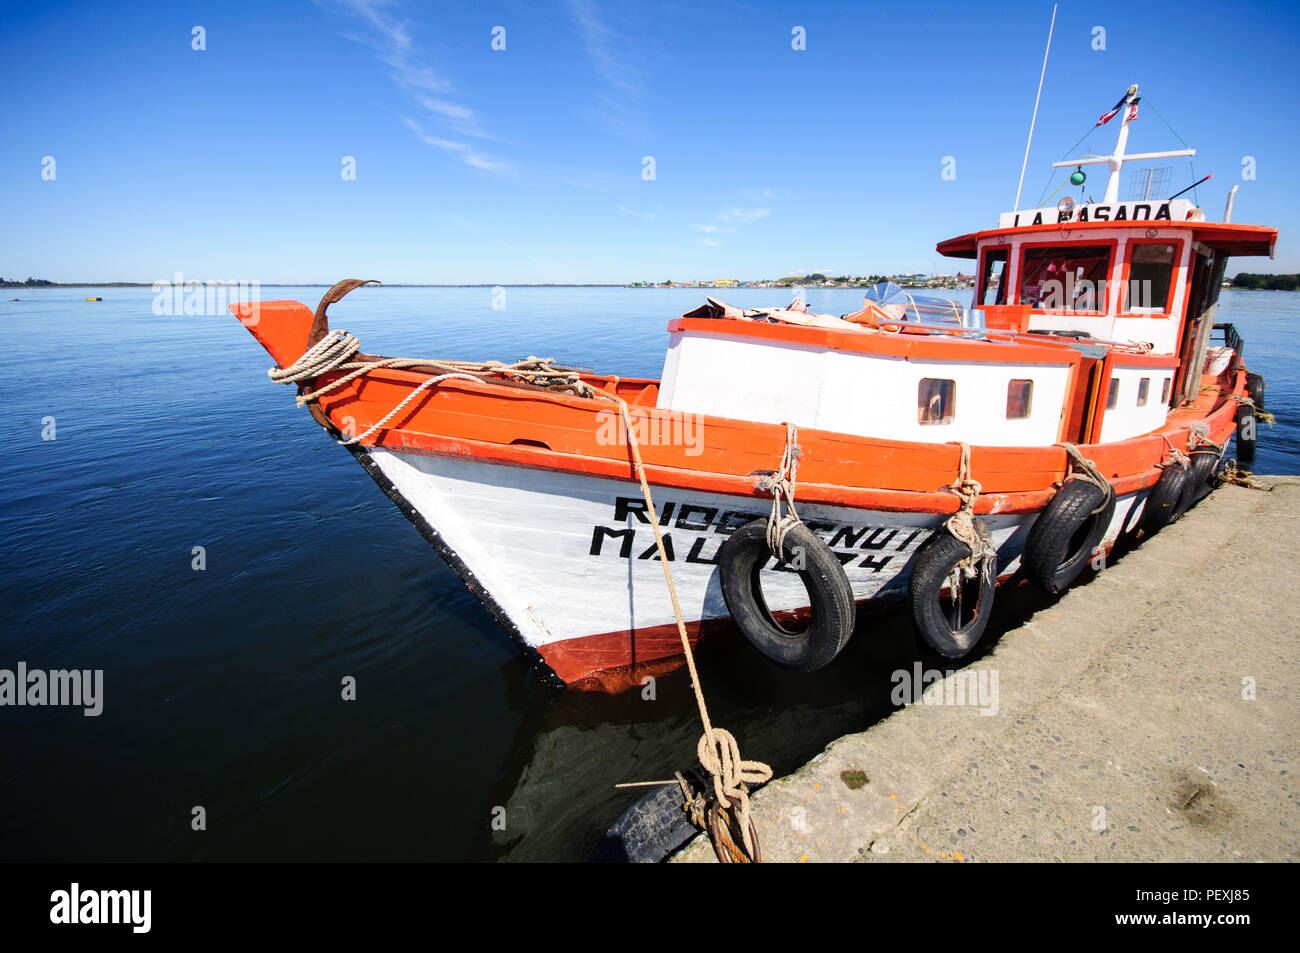 A traditional boat is moored at La Pasada, opposite Maullin town on the estuary of the Maullin River in the Los Lagos region of Chile. Stock Photo